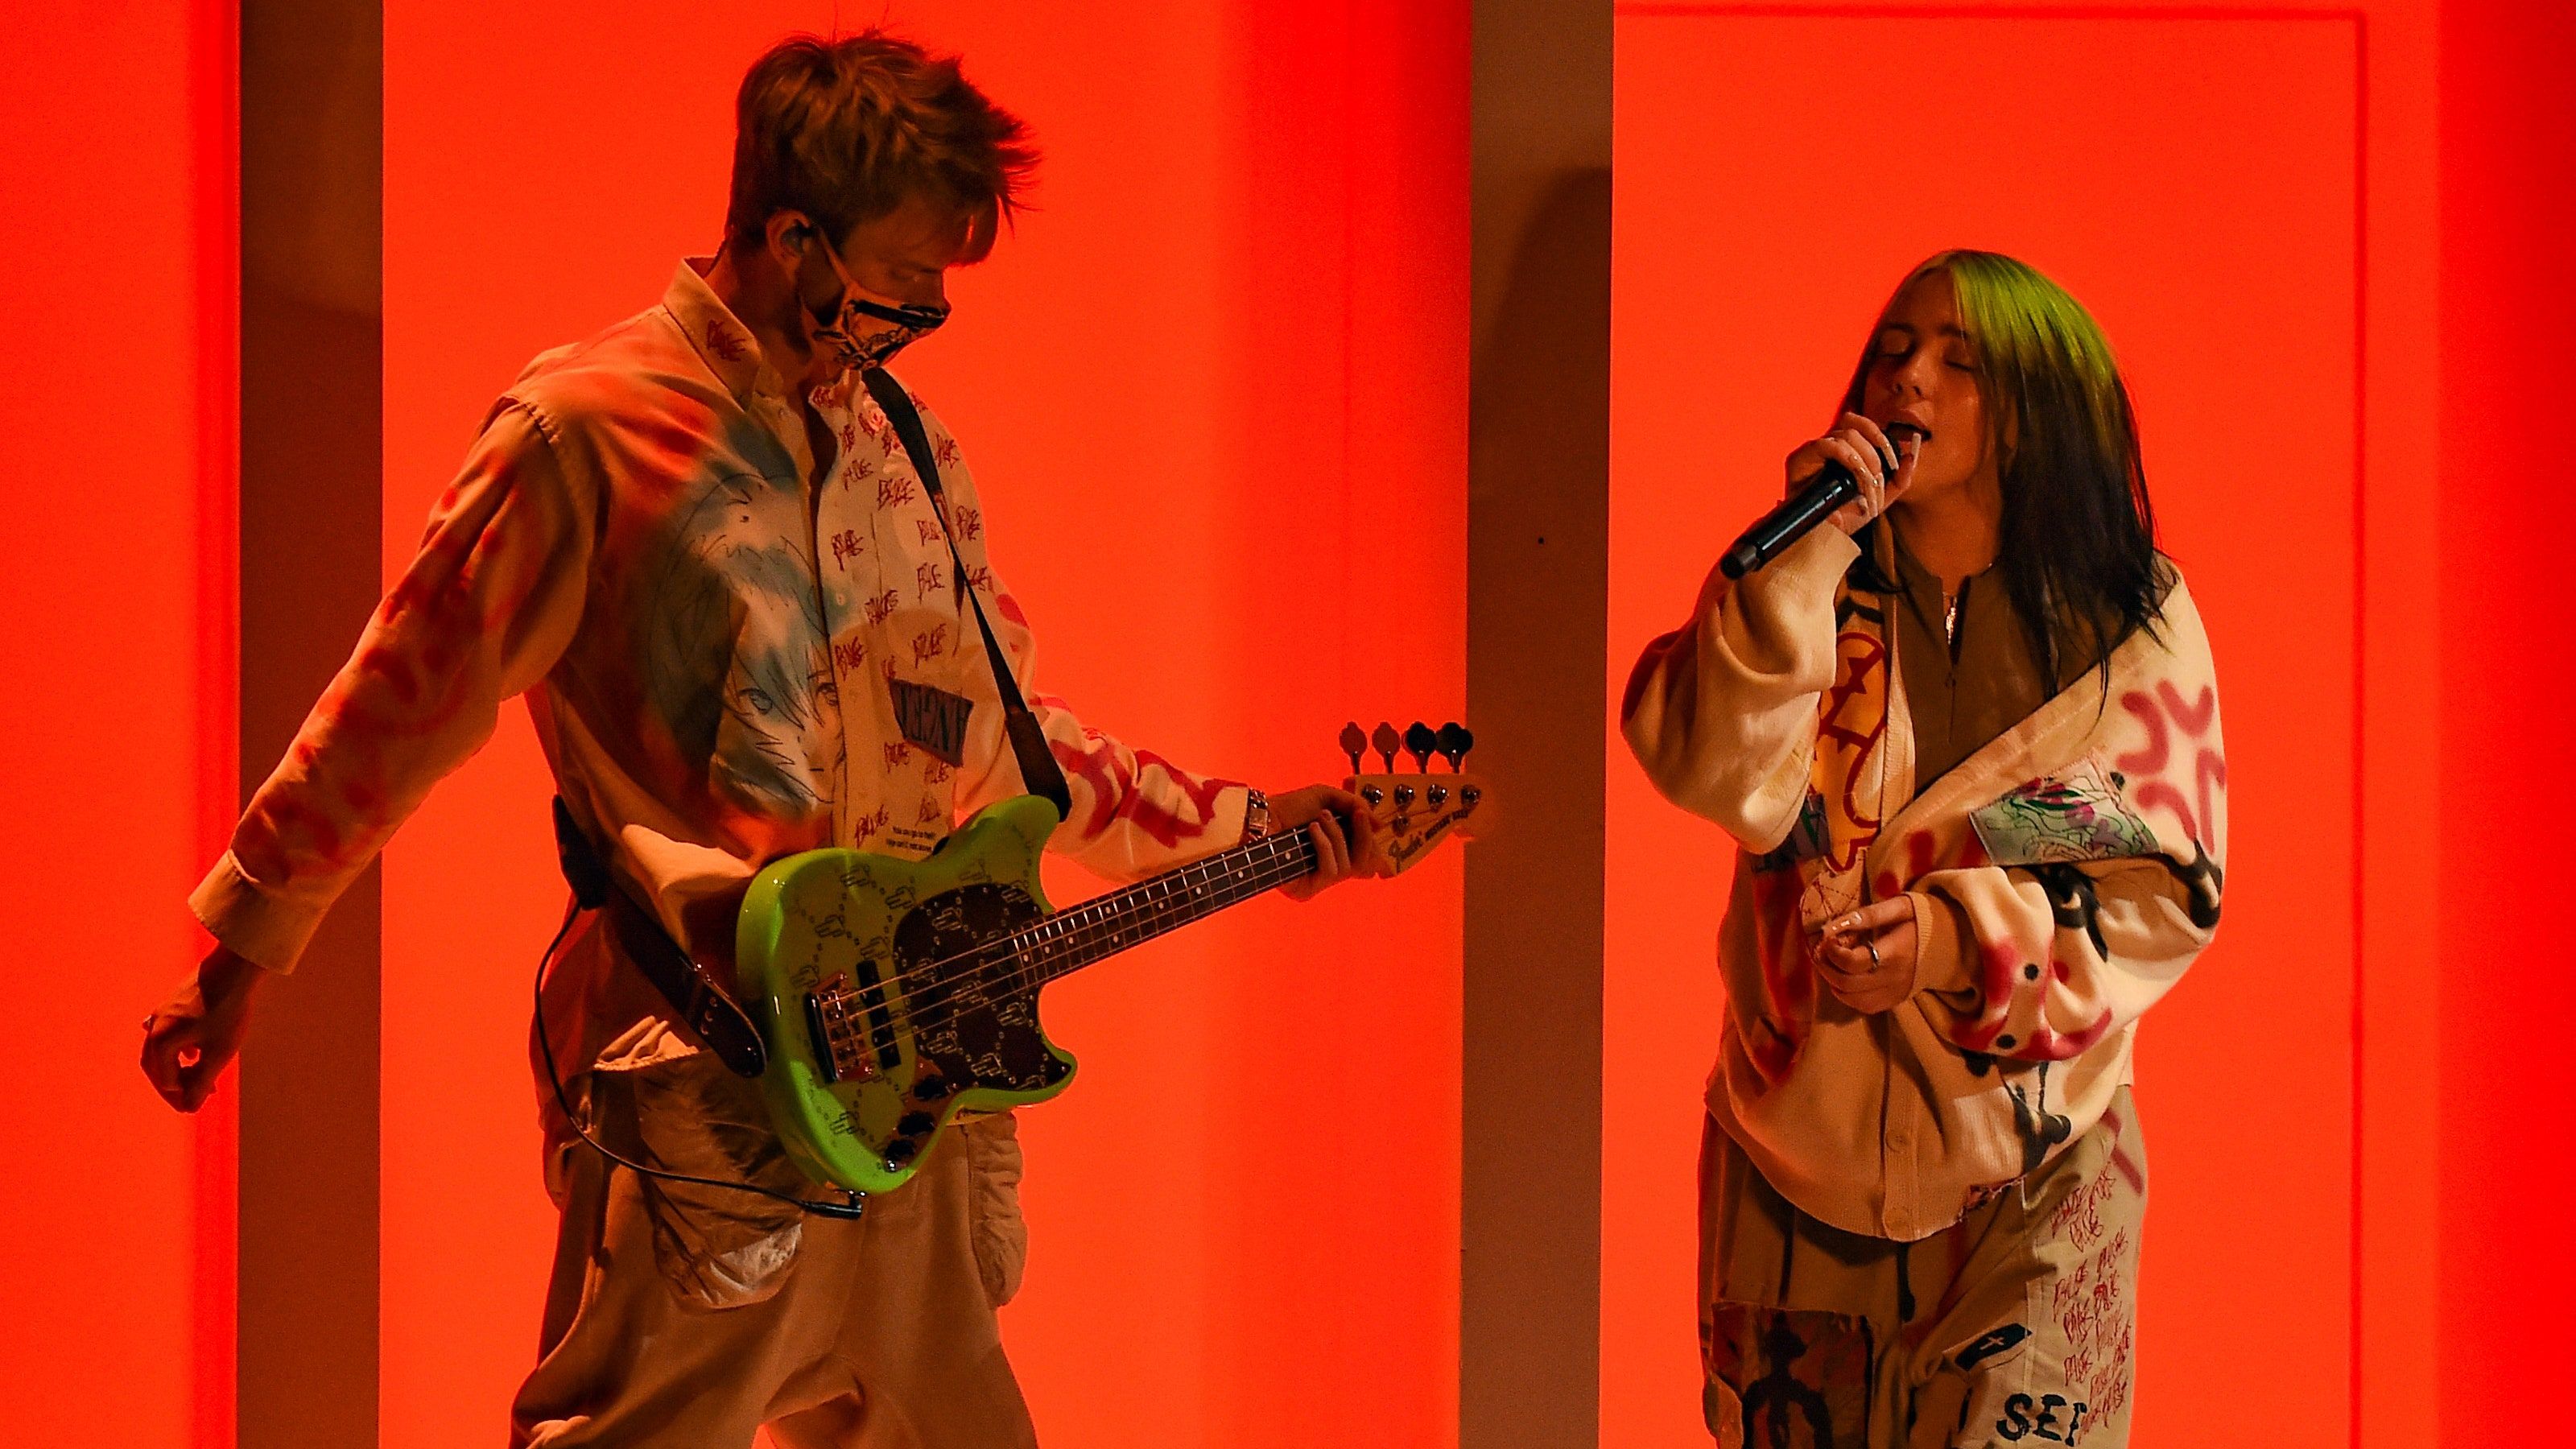 Watch Billie Eilish Perform “Therefore I Am” at AMAs 2020